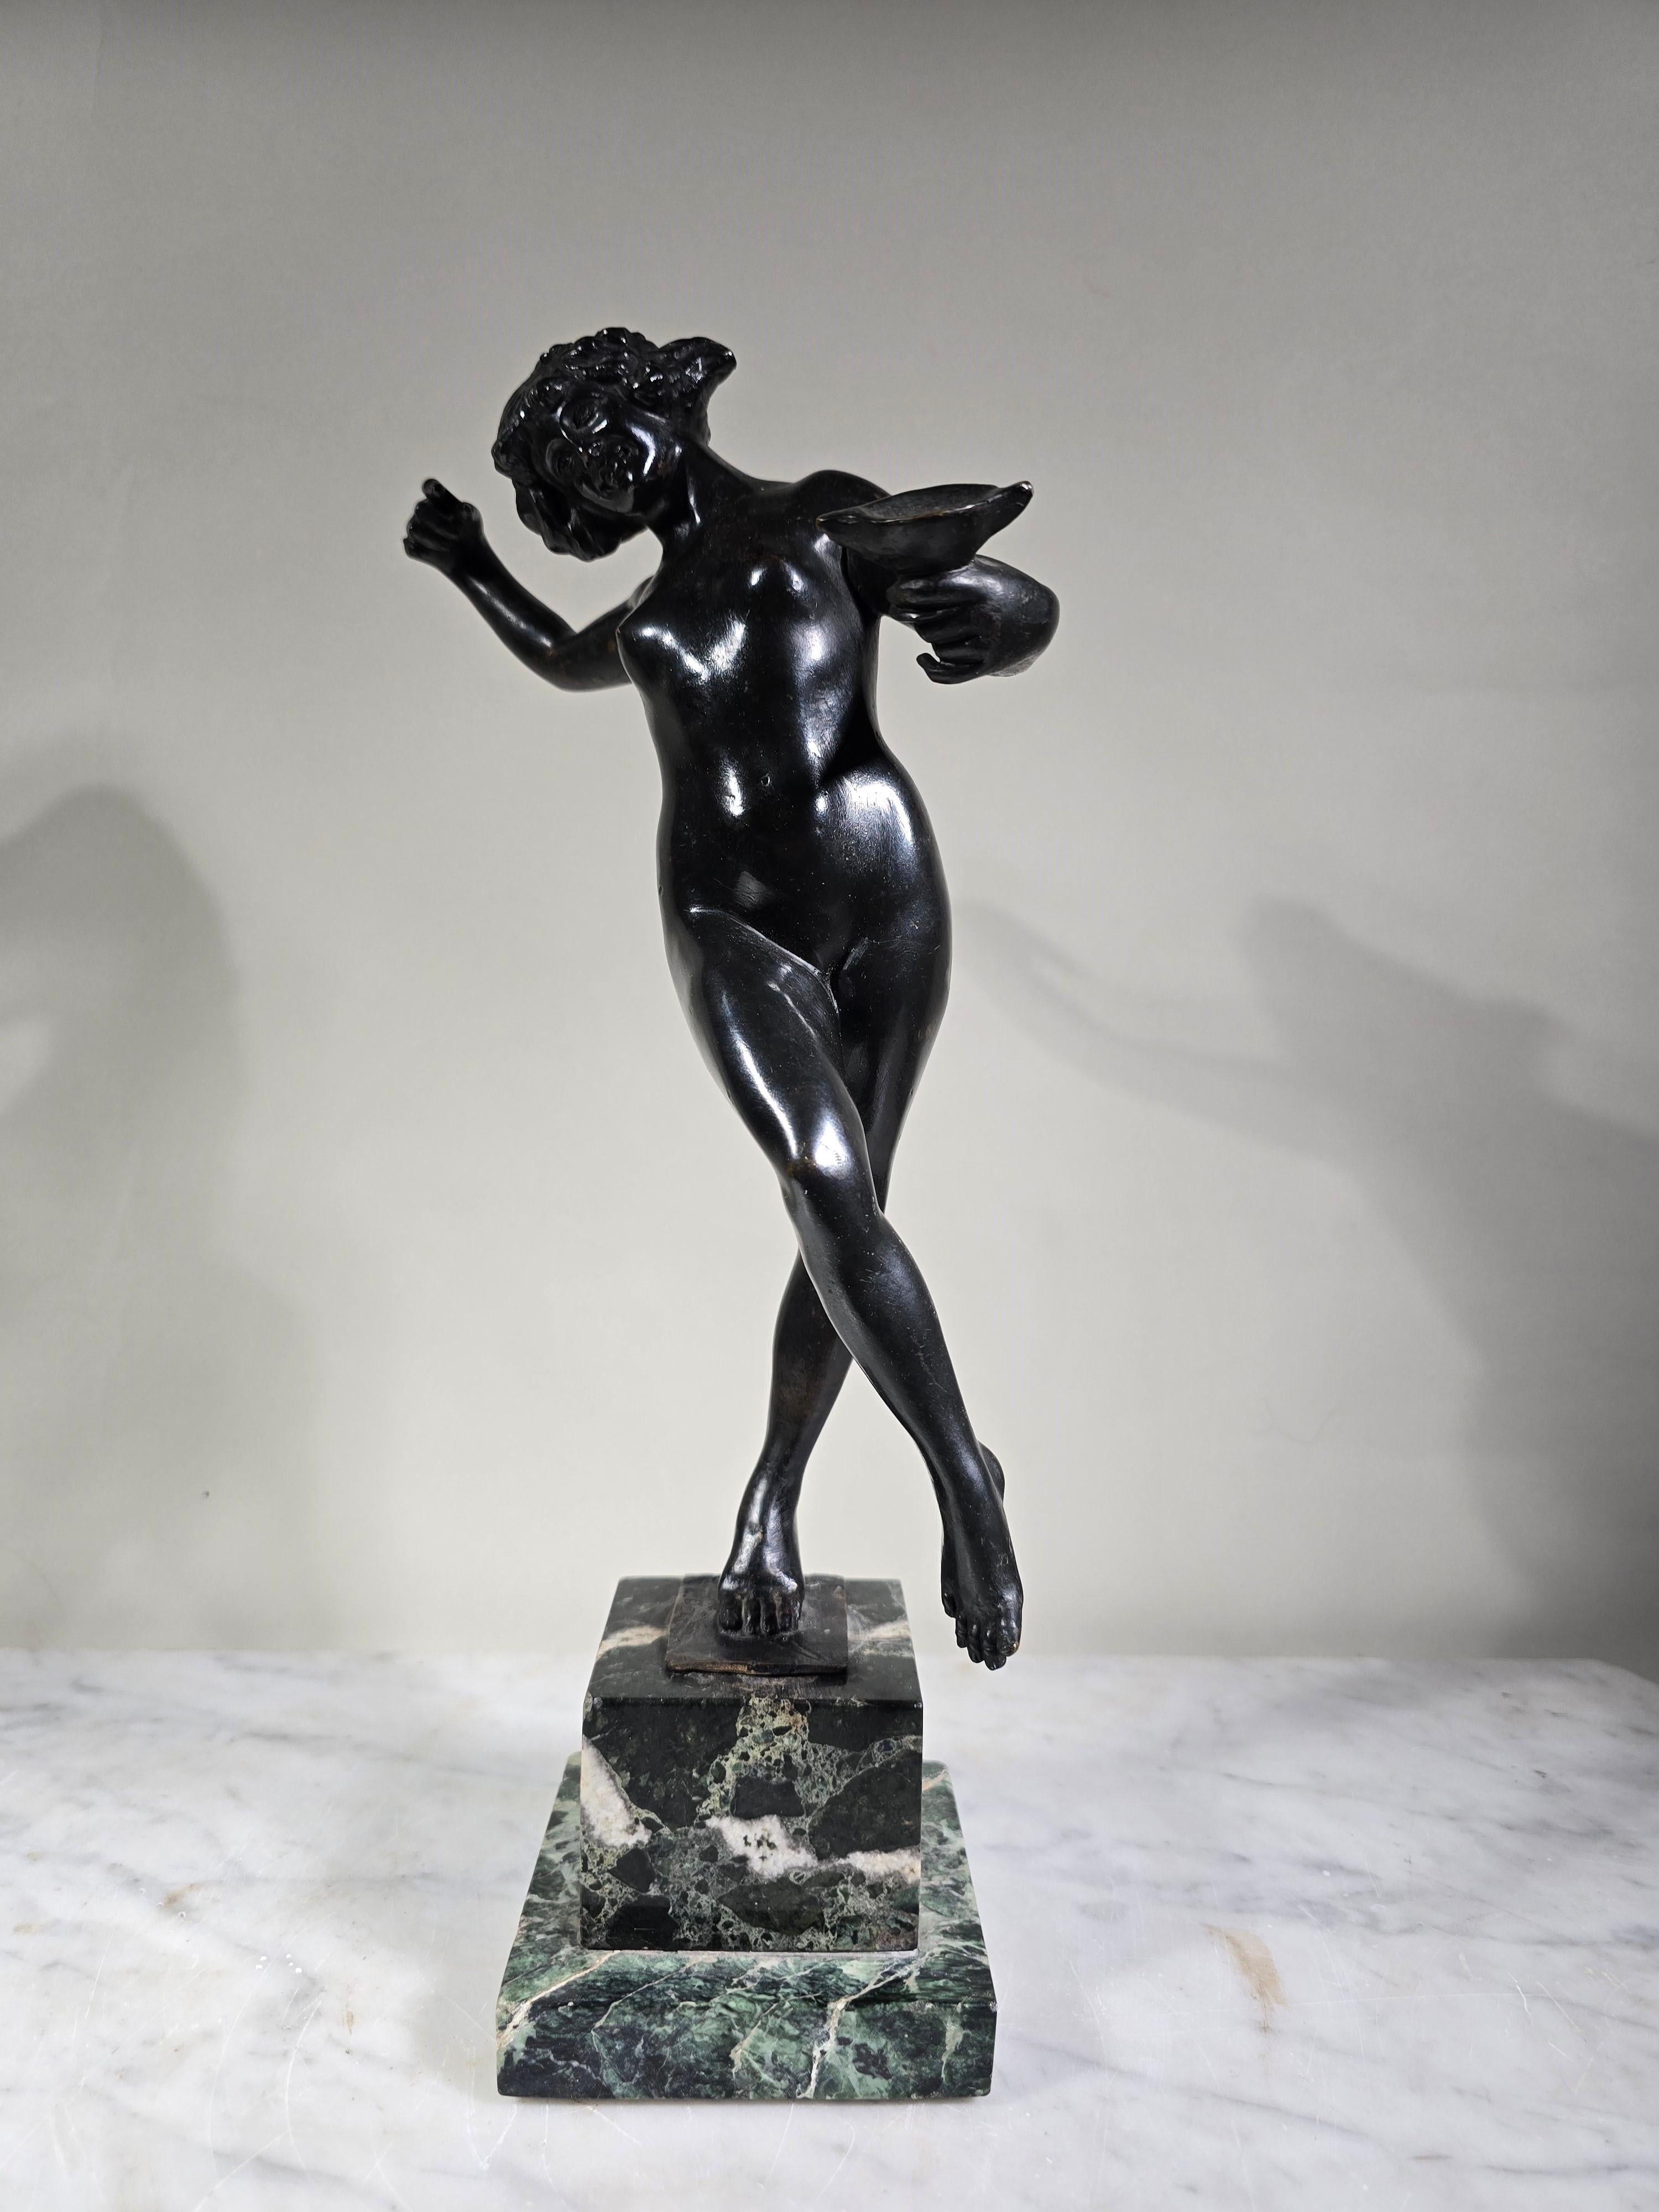 This elegant bronze sculpture captures the beauty and grace of ancient Greece, depicting a maiden in all her splendor. Created by the renowned Italian sculptor Luigi de Luca (1857-1953), this timeless work of art is a unique piece that will surely